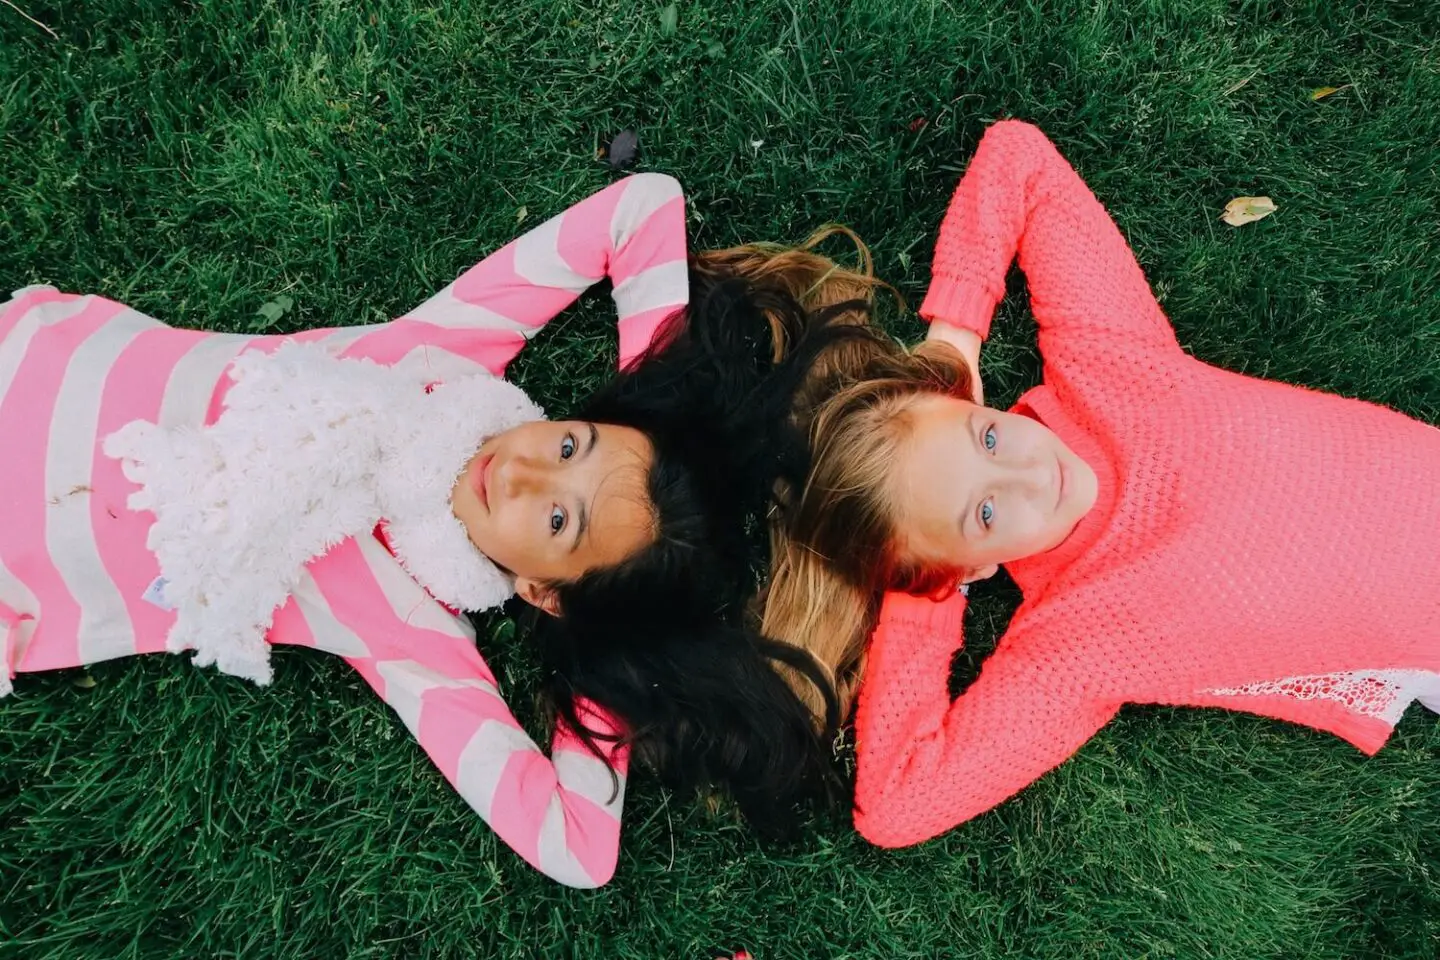 2 teenage girls lying on the grass with their arms behind their heads